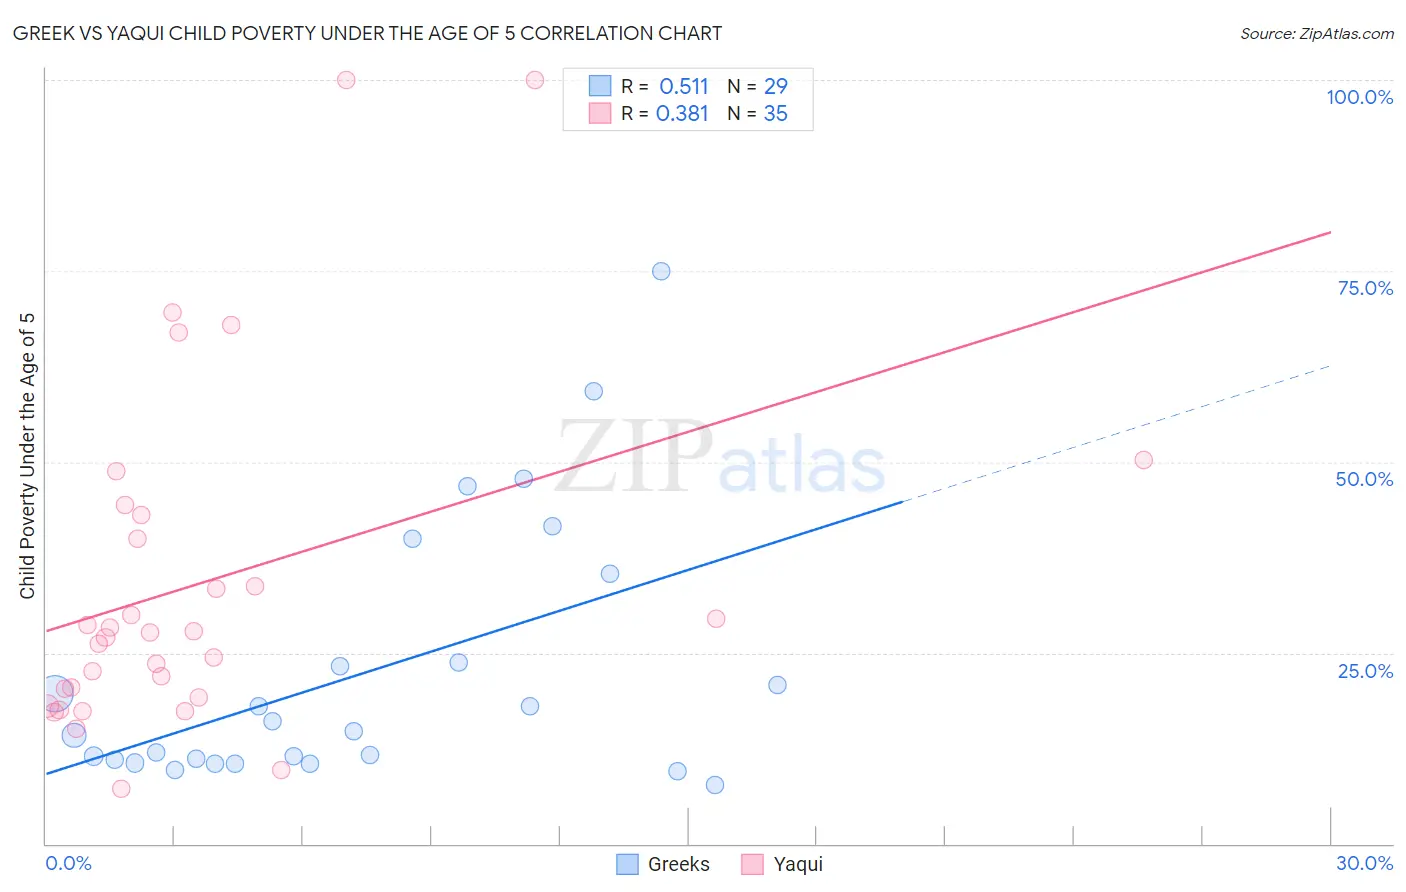 Greek vs Yaqui Child Poverty Under the Age of 5